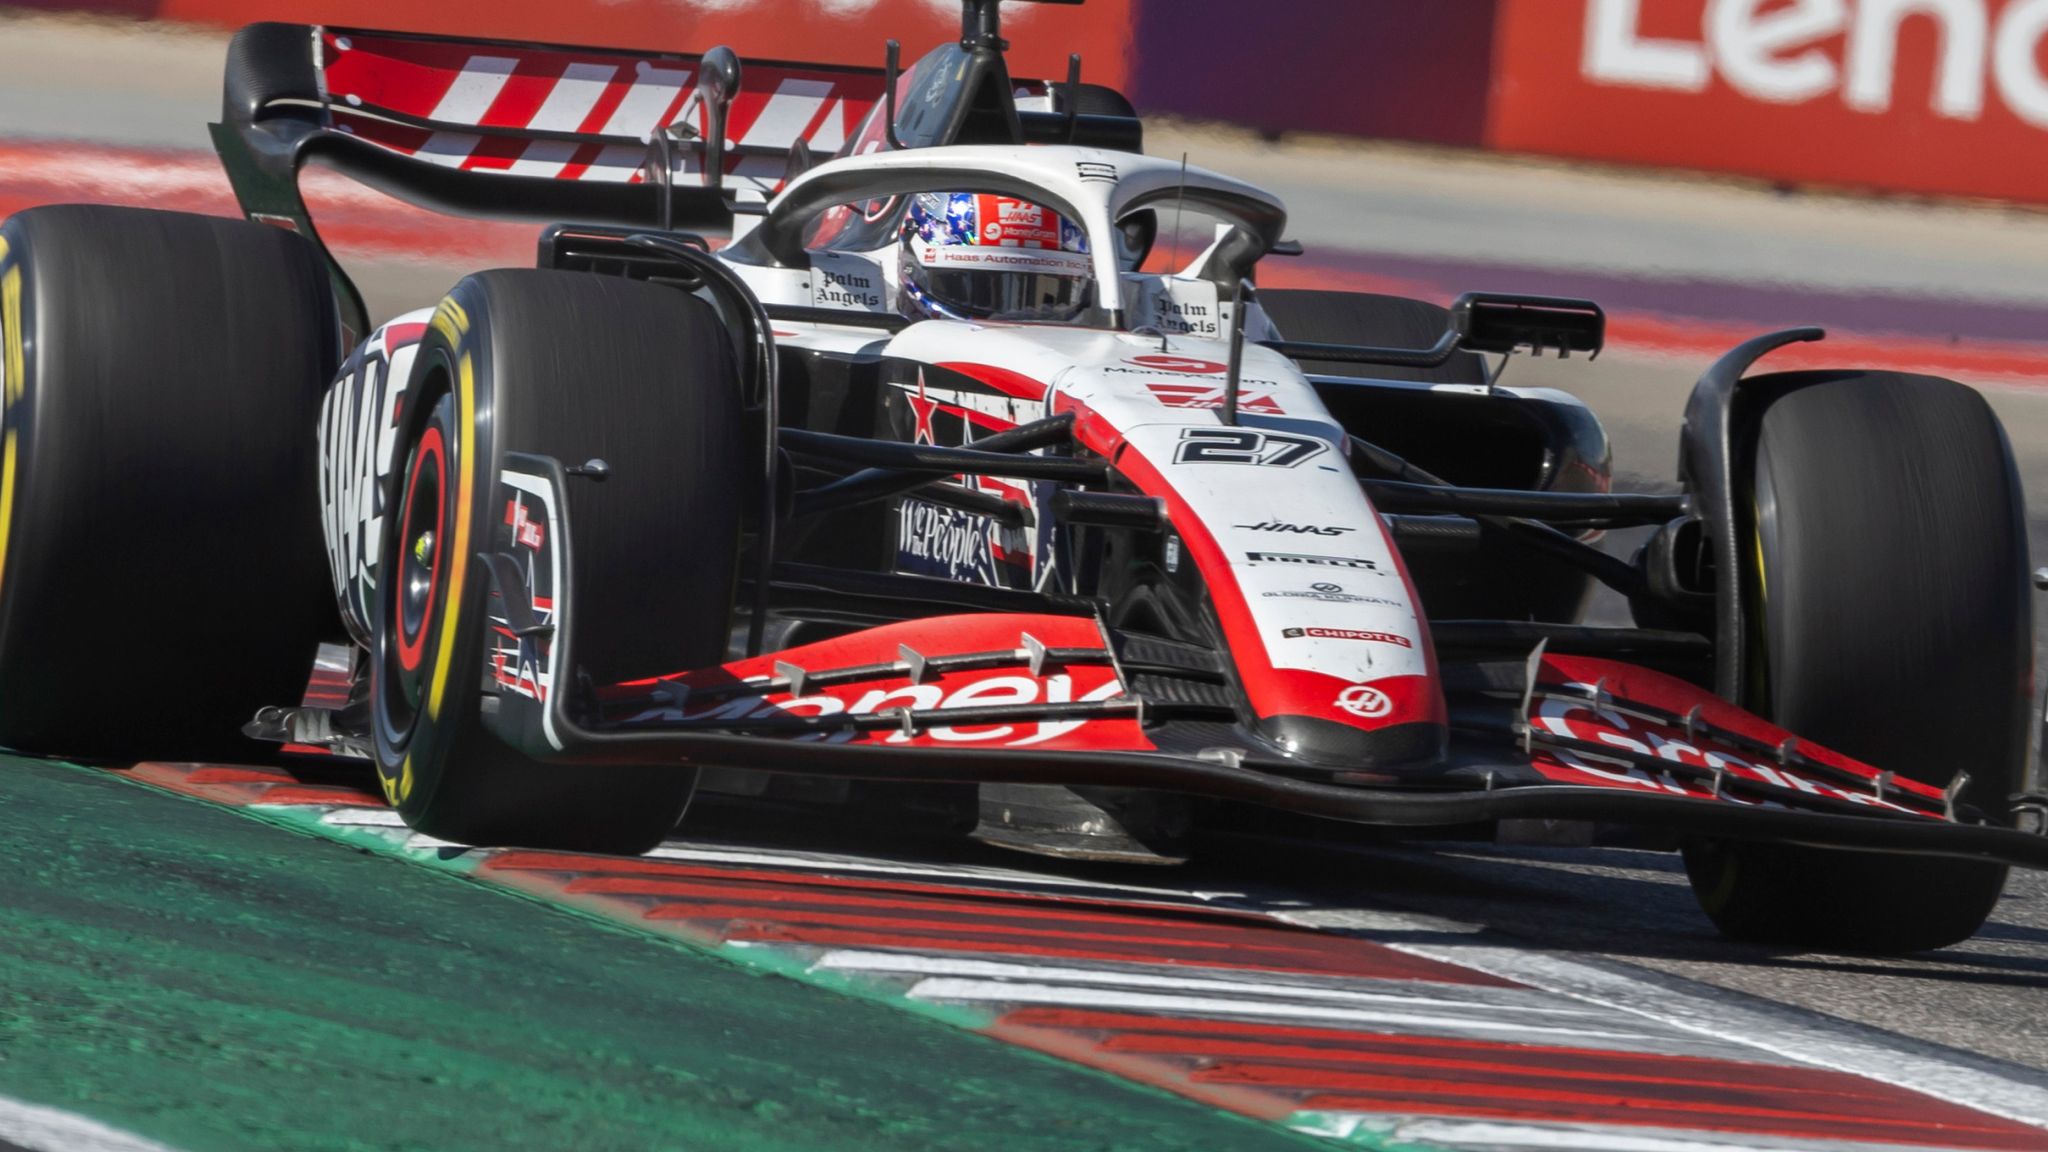 It's time for Haas to pull the plug on its F1 project